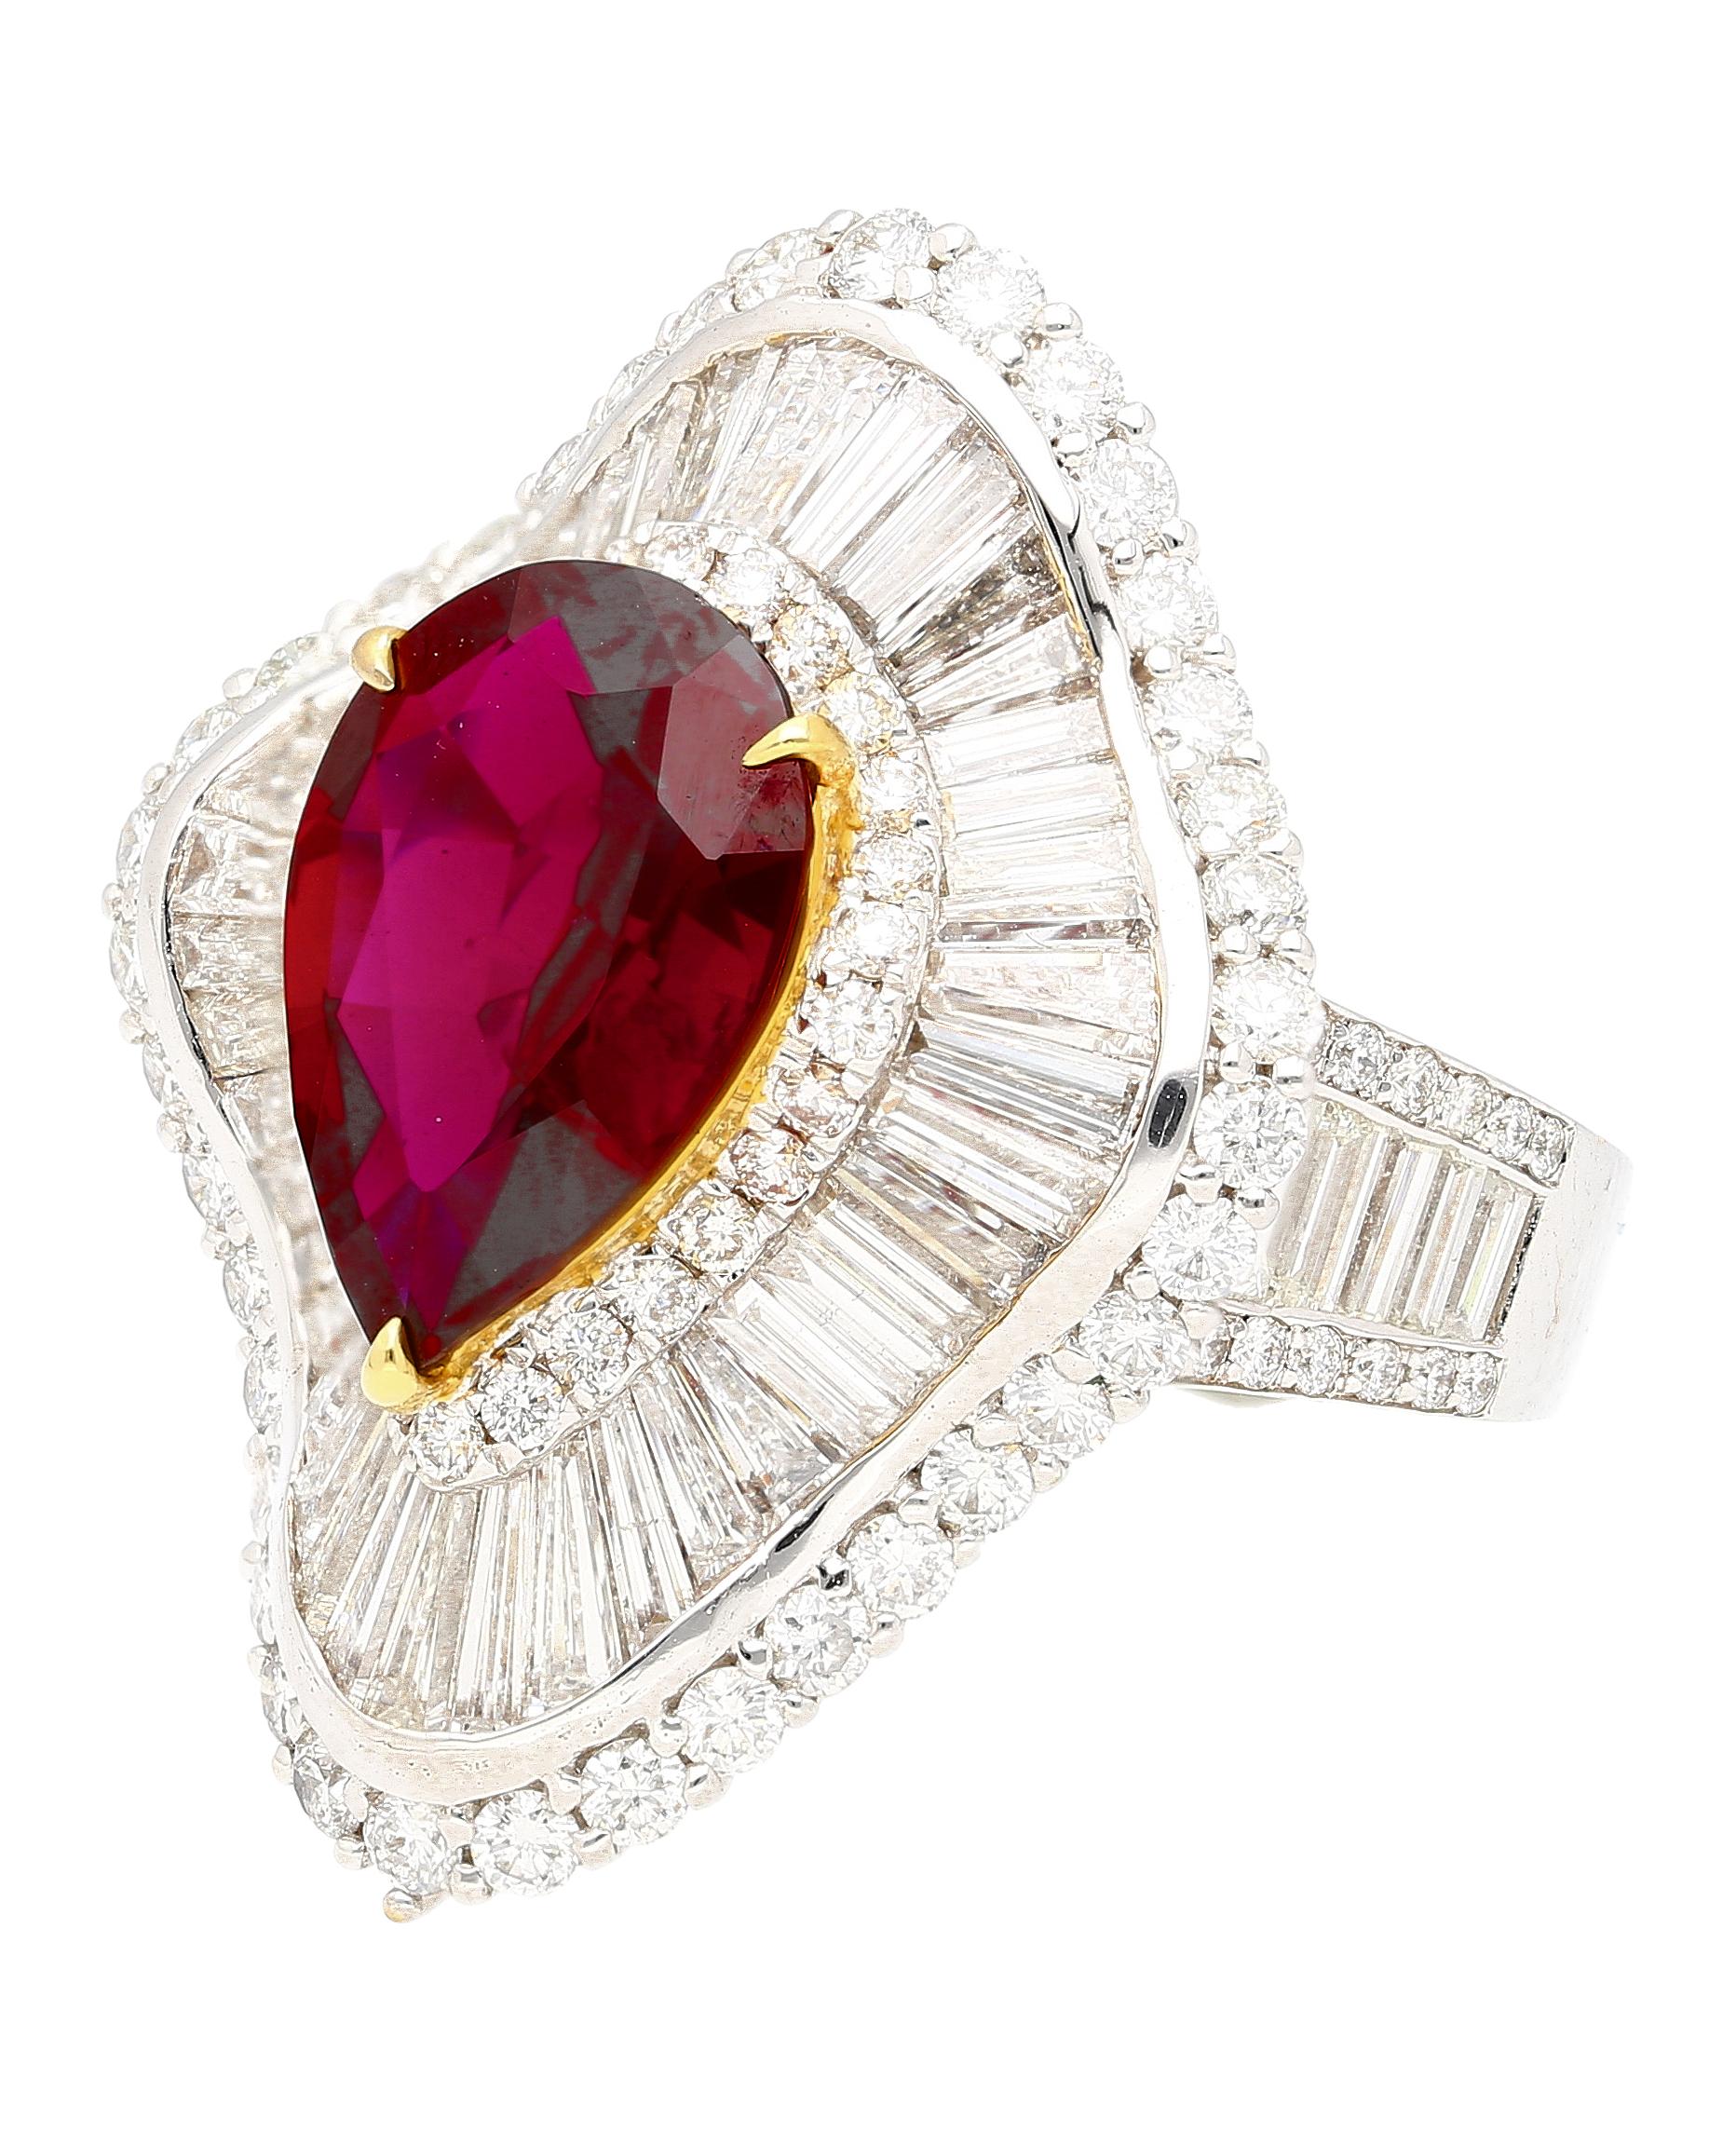 This ballerina ring features a 5.30 carat pear ruby from Thailand (Siam) adorned by 55 trillion and baguette cut diamonds, totaling 5.14 carats and 98 round cut diamonds, totaling 1.69 carats. The ruby is prong set in 18k yellow gold, and the